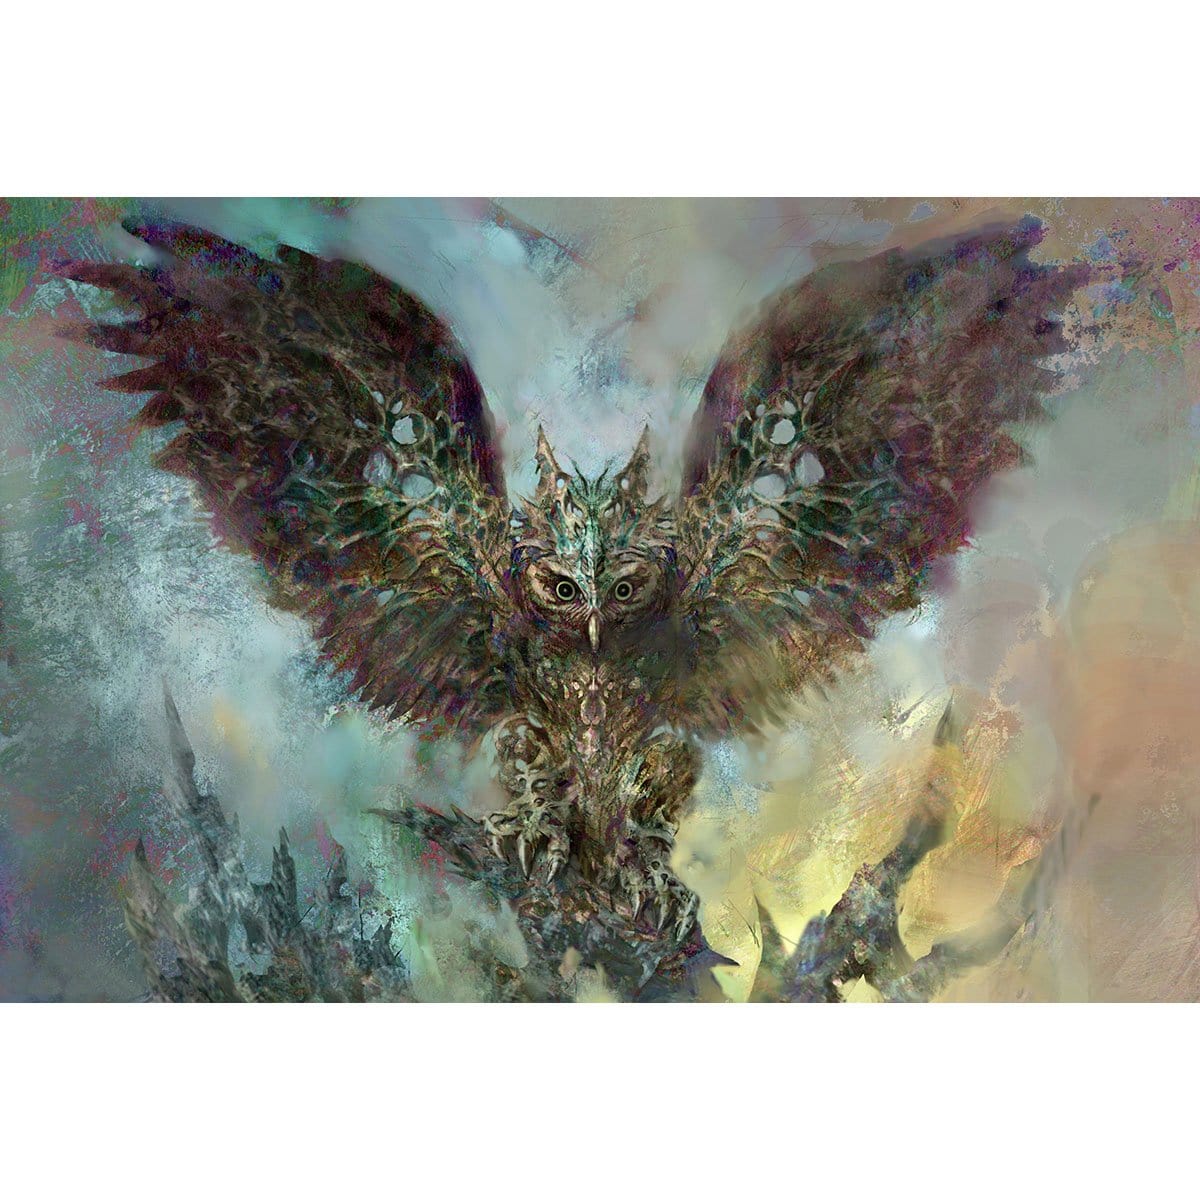 Baleful Strix Print - Print - Original Magic Art - Accessories for Magic the Gathering and other card games